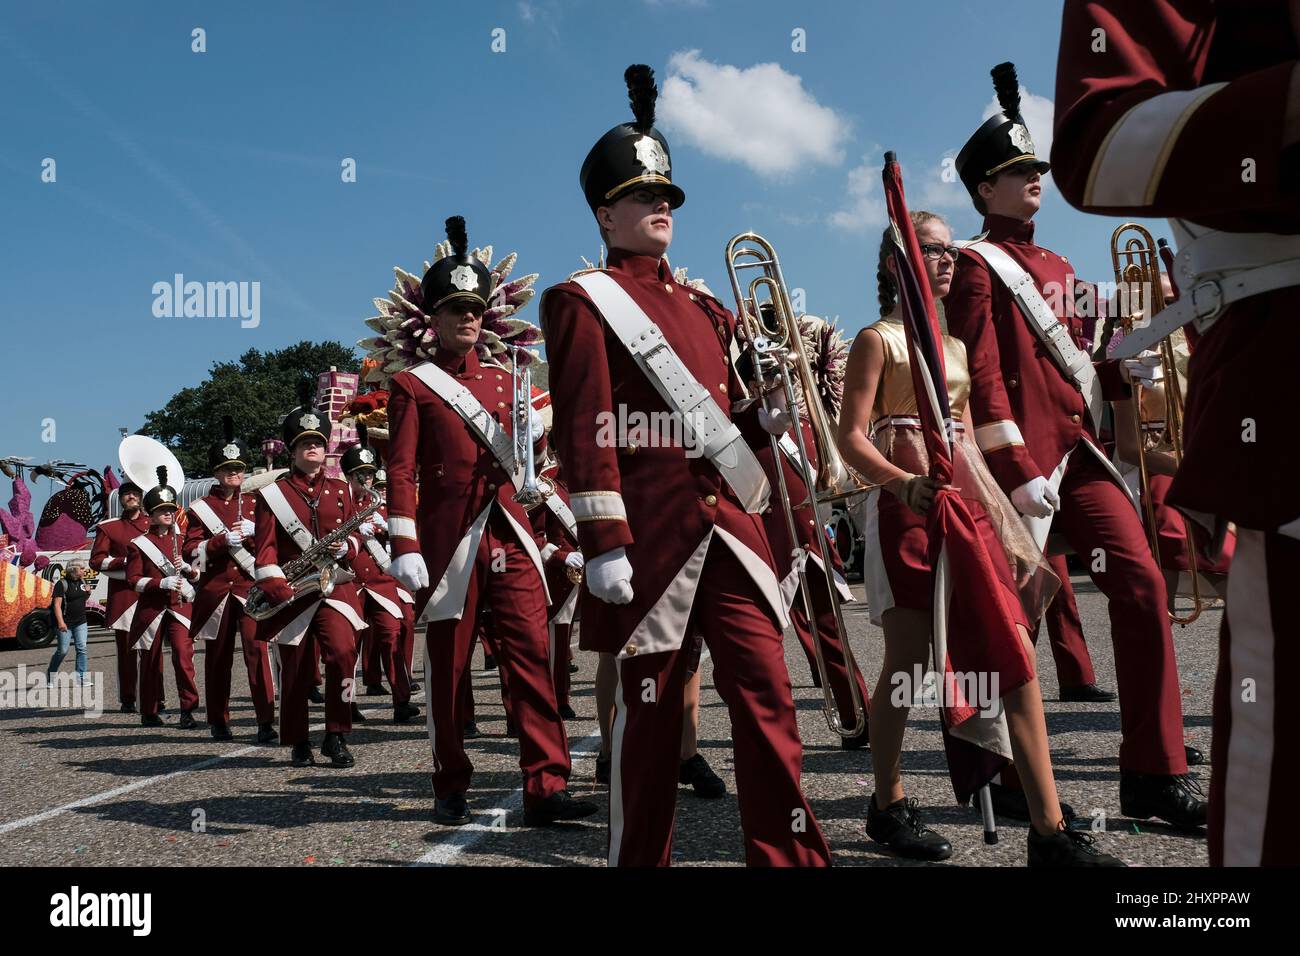 Several music bands take part in the parade Stock Photo